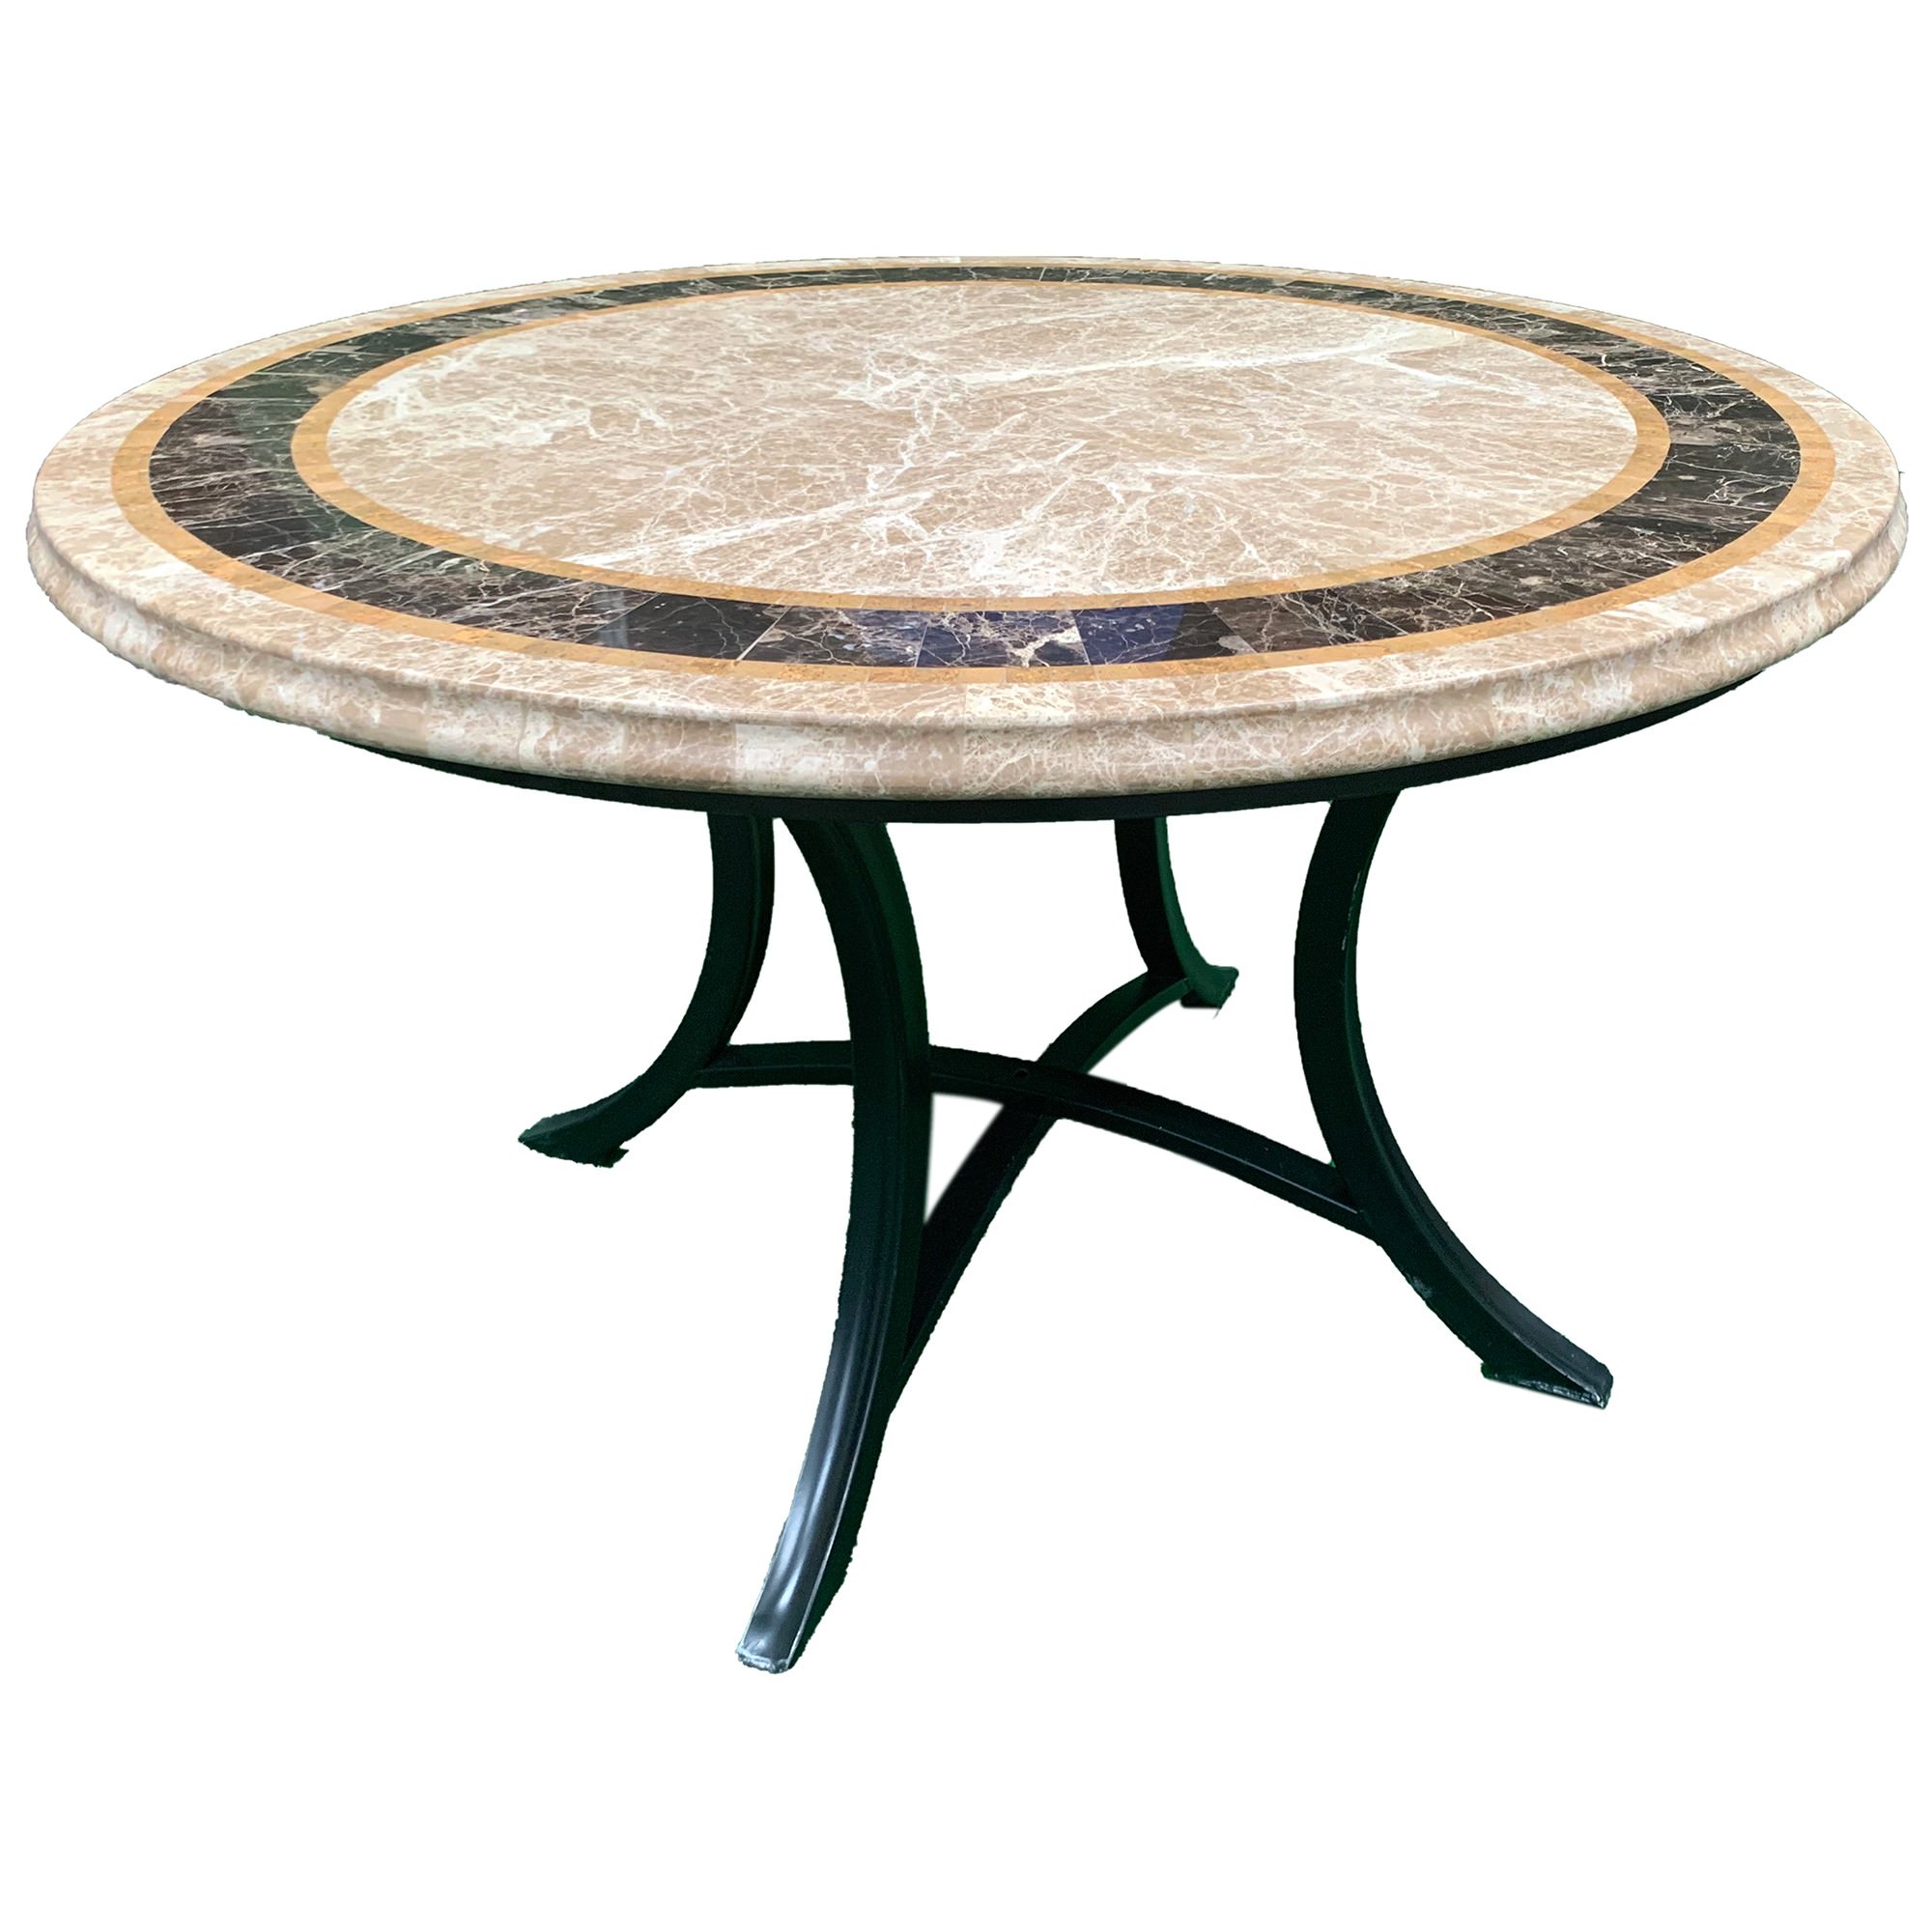 Saturn Marble Stone Round Outdoor Dining Table, 120cm